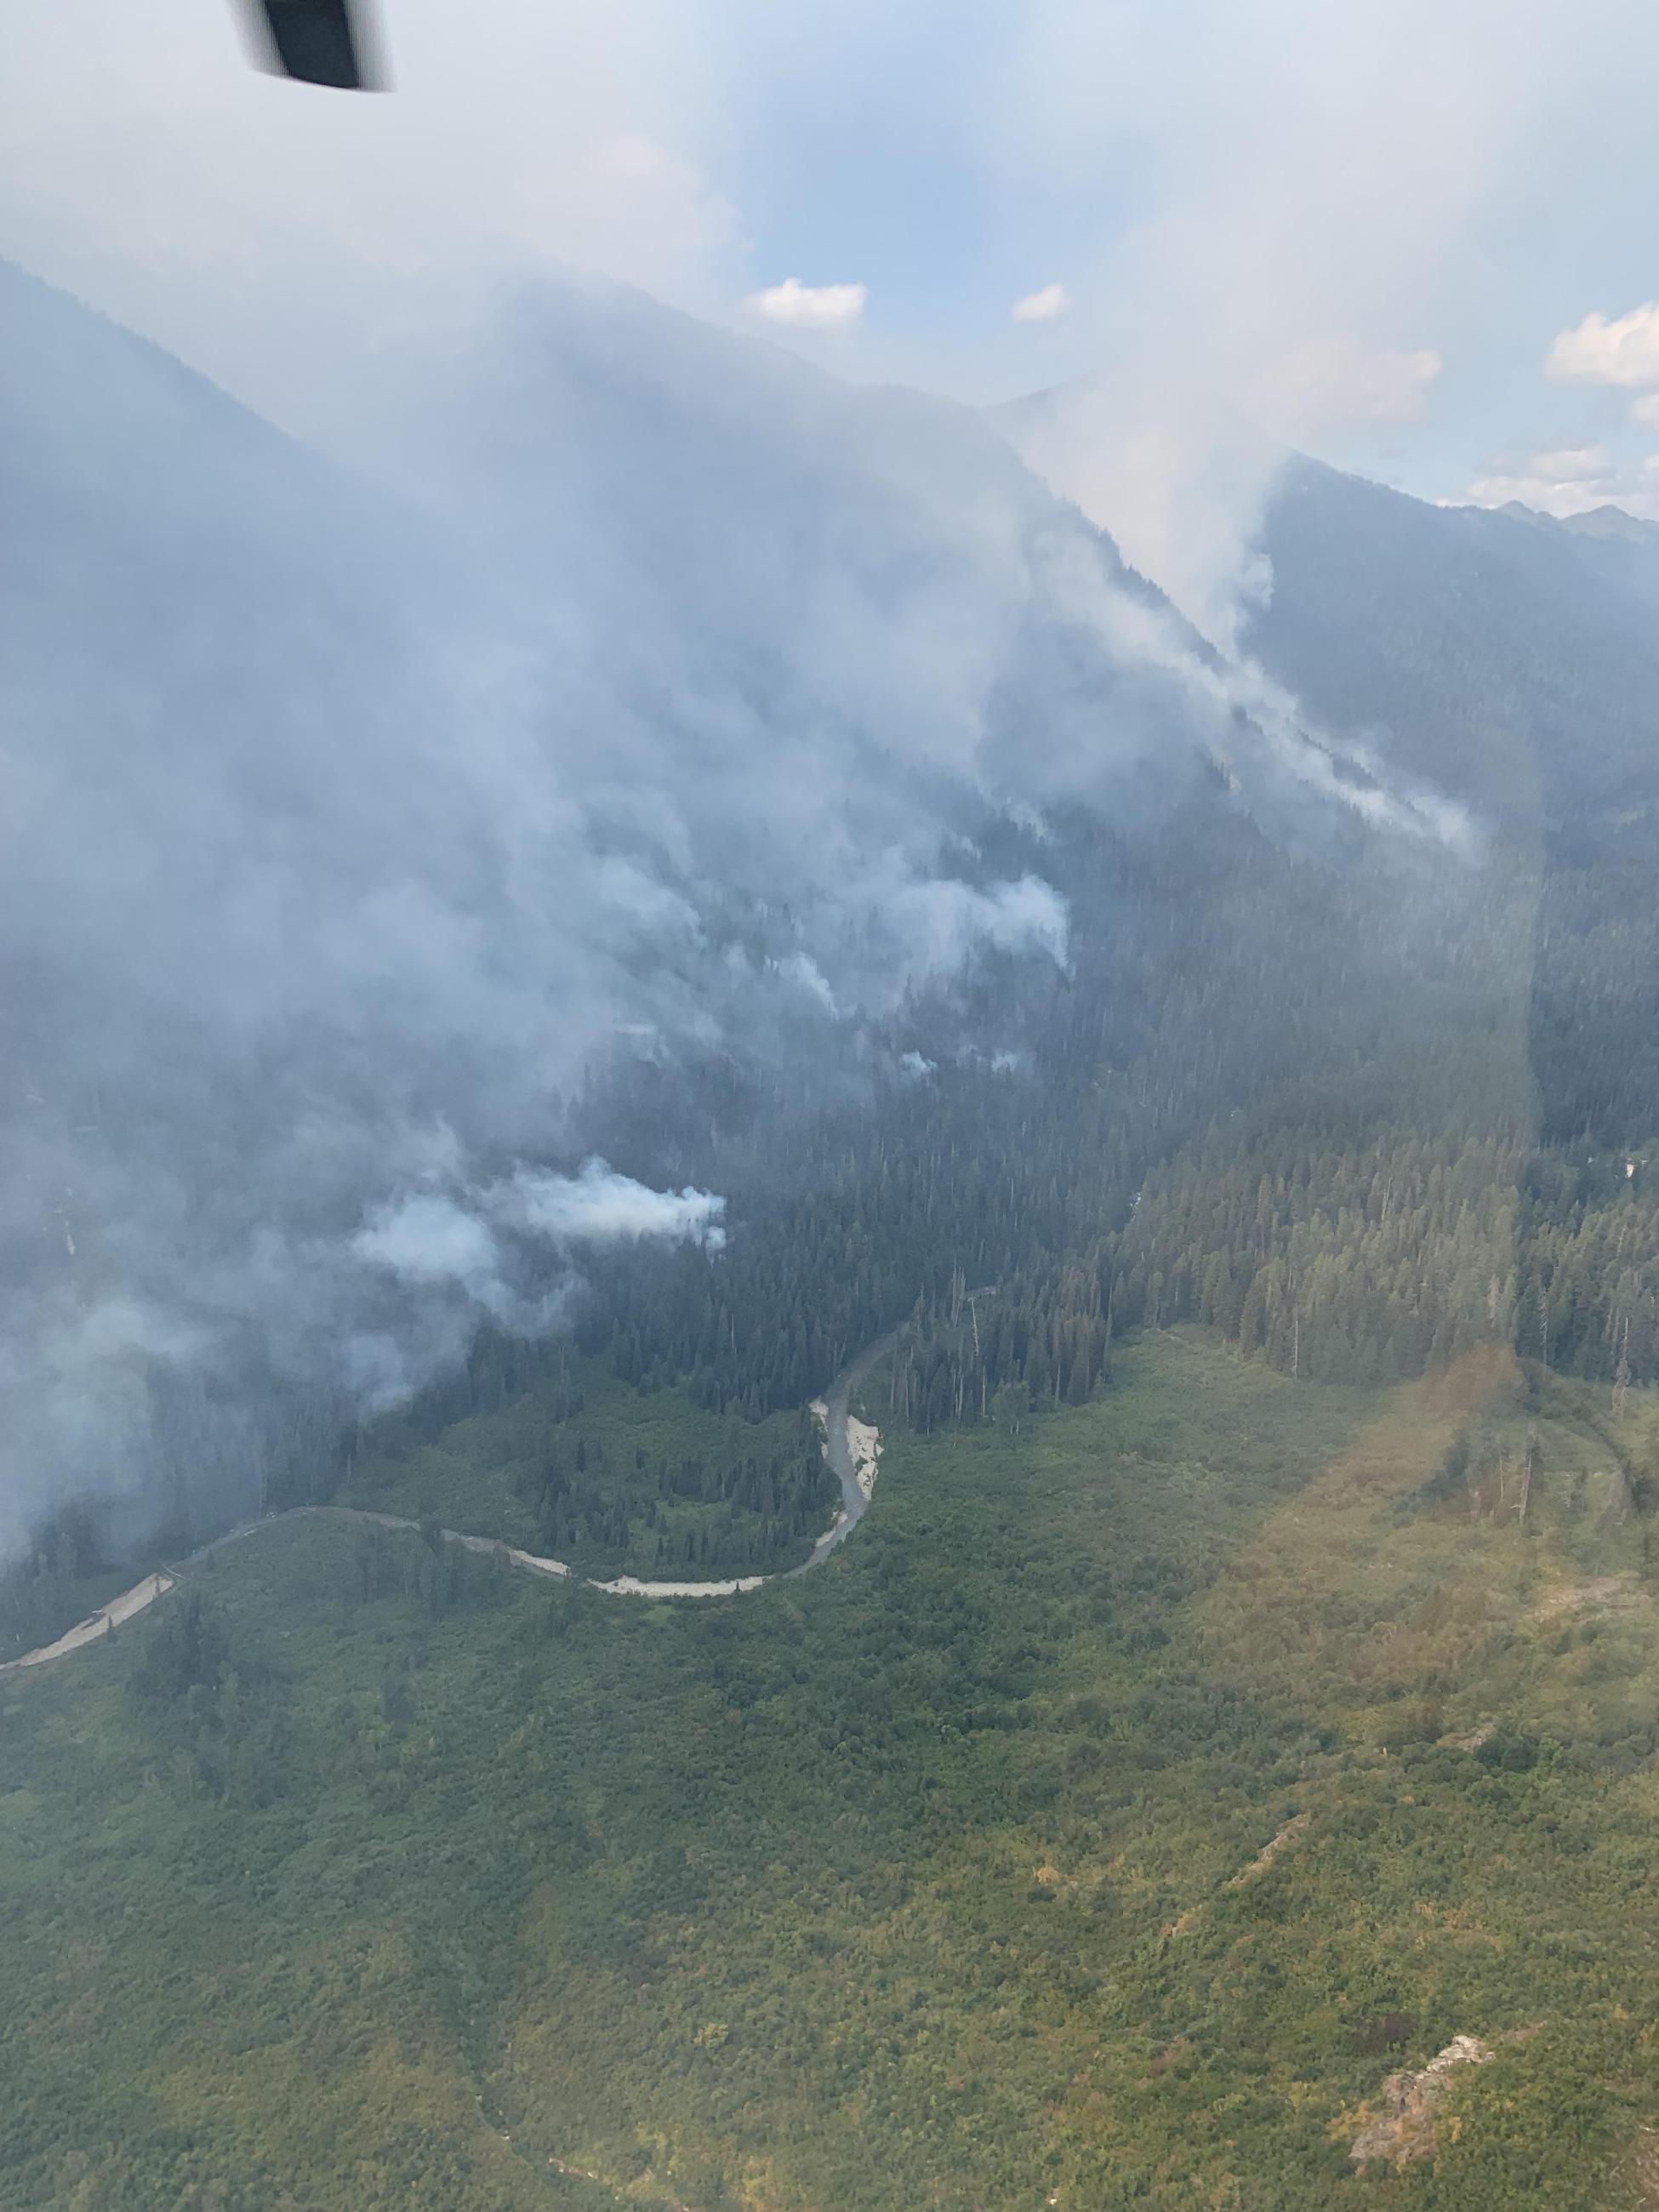 Residents urged to take precautions as wildfire smoke comprises